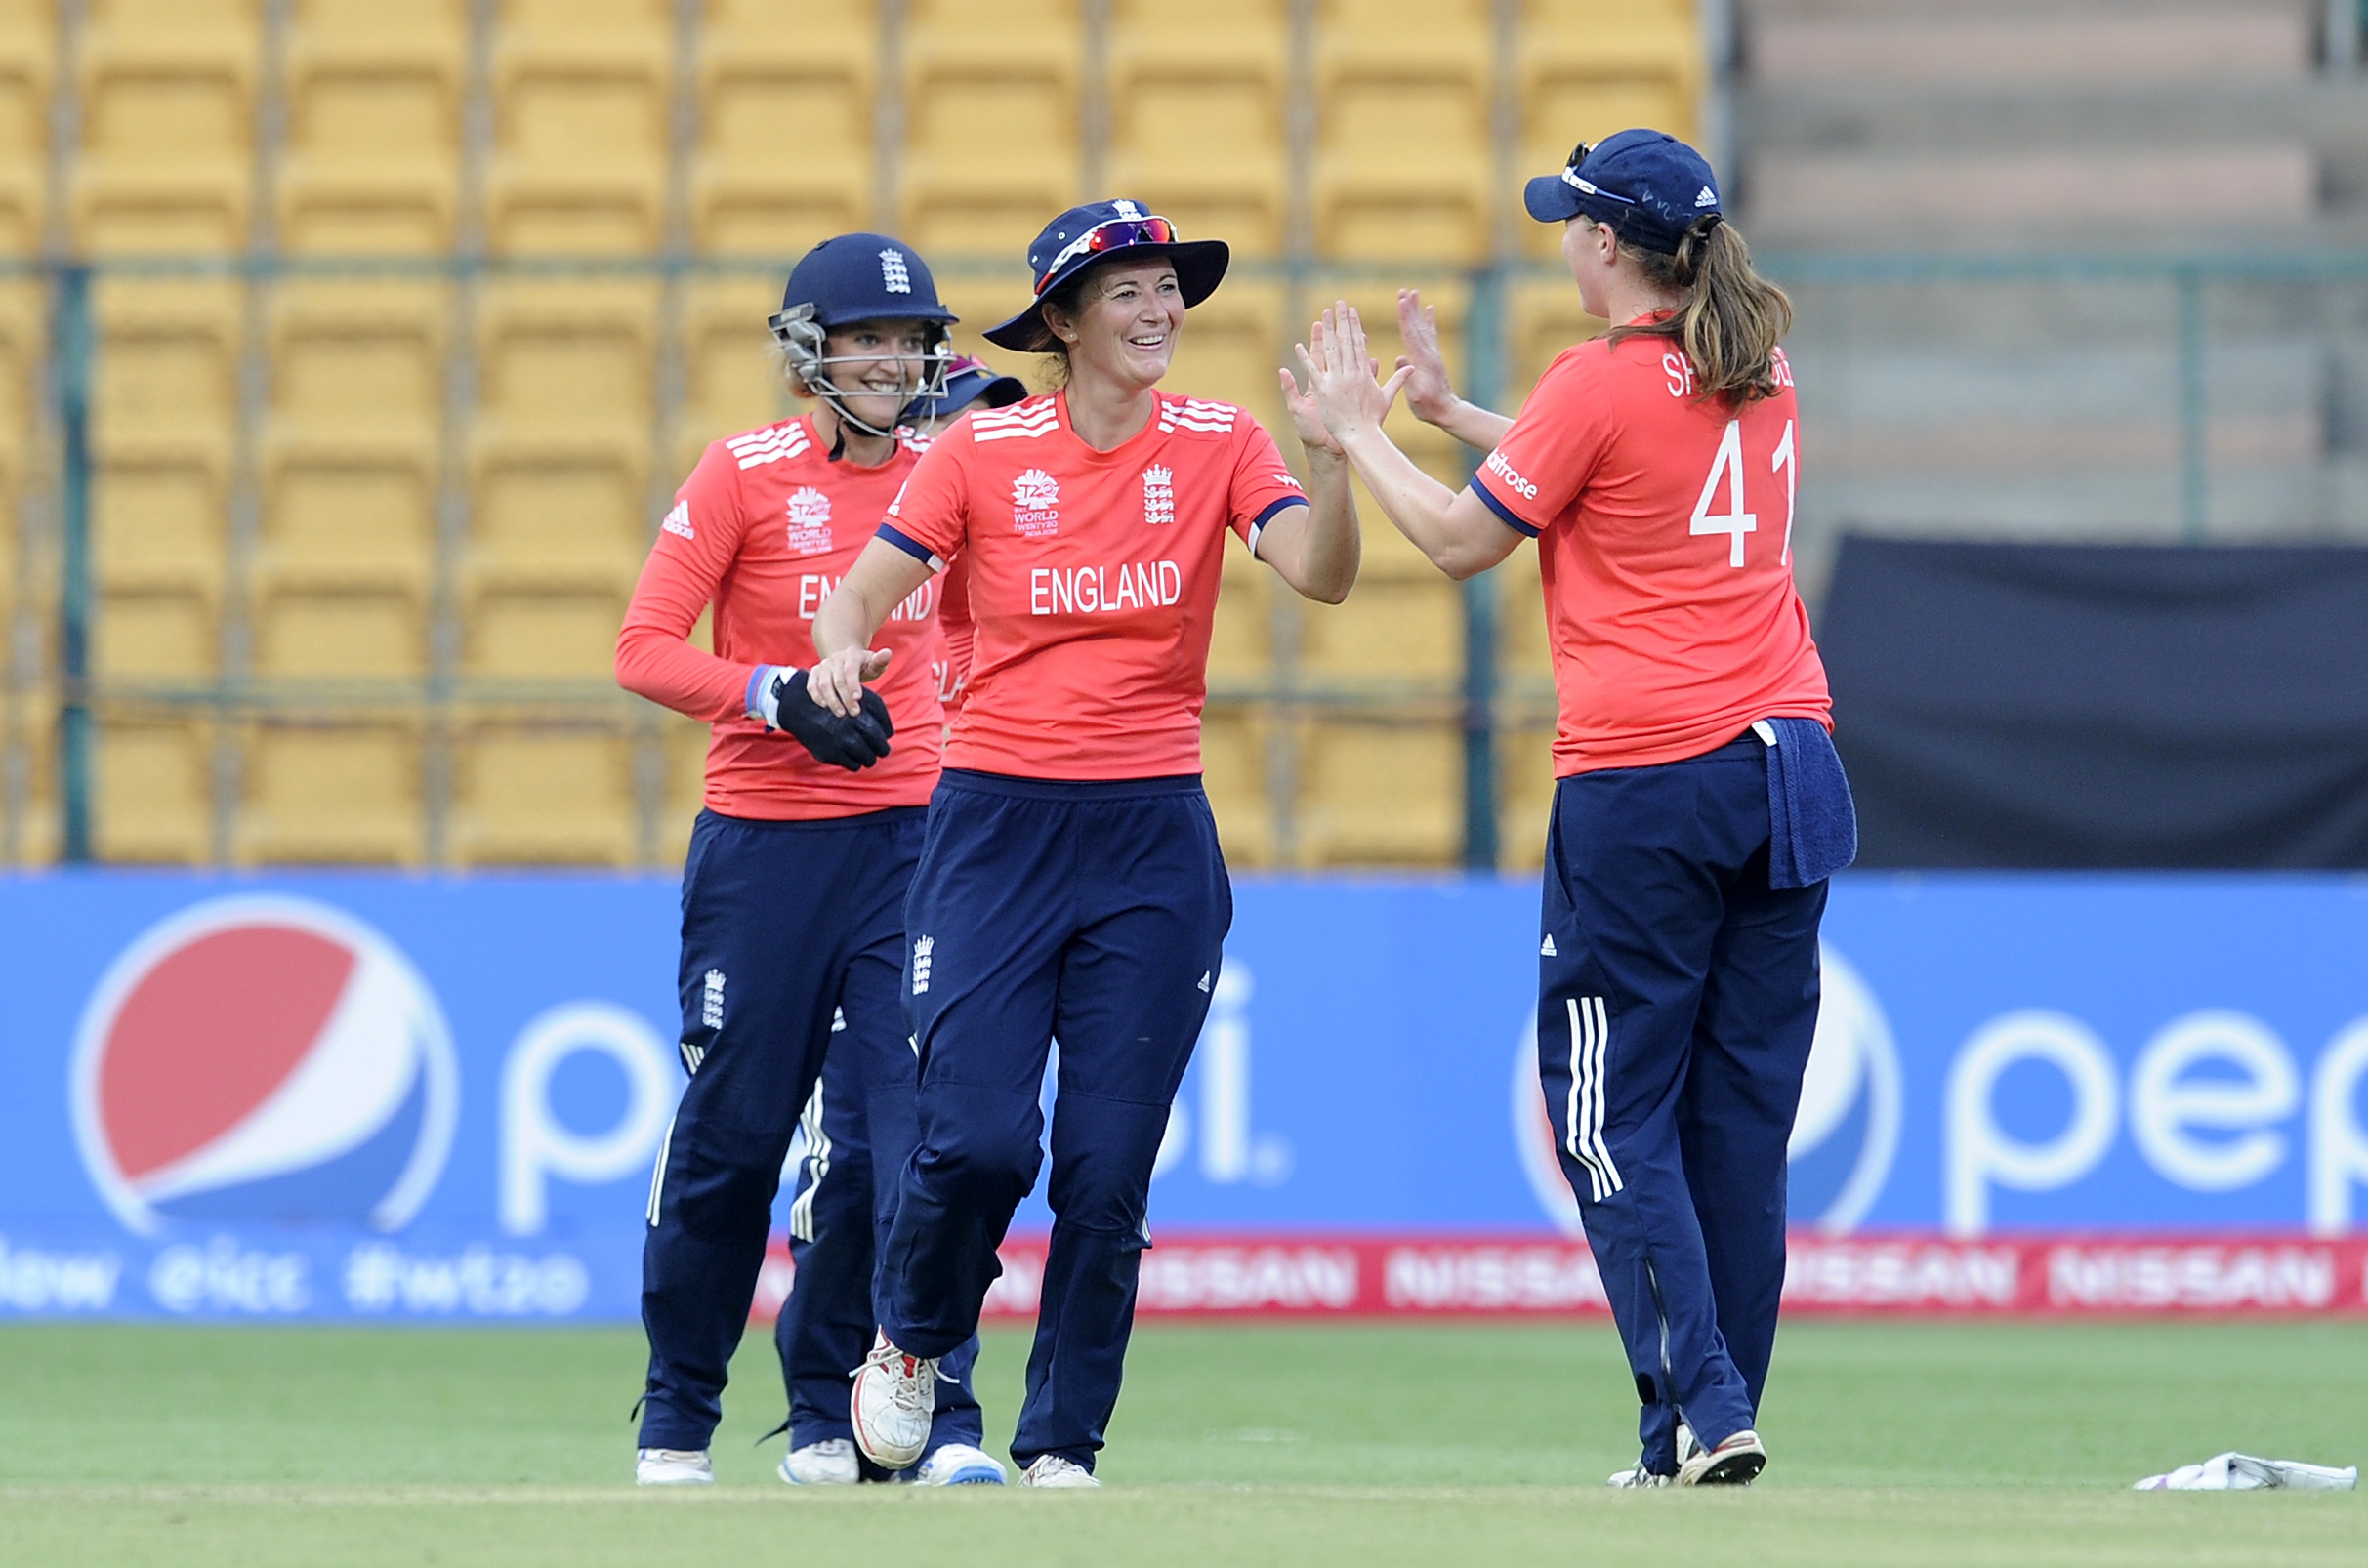 "Bangalore, INDIA - MARCH 17 : Charlotte Edwards, Captain of England celebrates the wicket of Rumana Ahmed of Bangladesh during the Women's ICC World Twenty20 India 2016 match between England and Bangladesh at the Chinnaswamy stadium on March 17, 2016 in Bangalore, India. (Photo by Pal Pillai/IDI via Getty Images).."